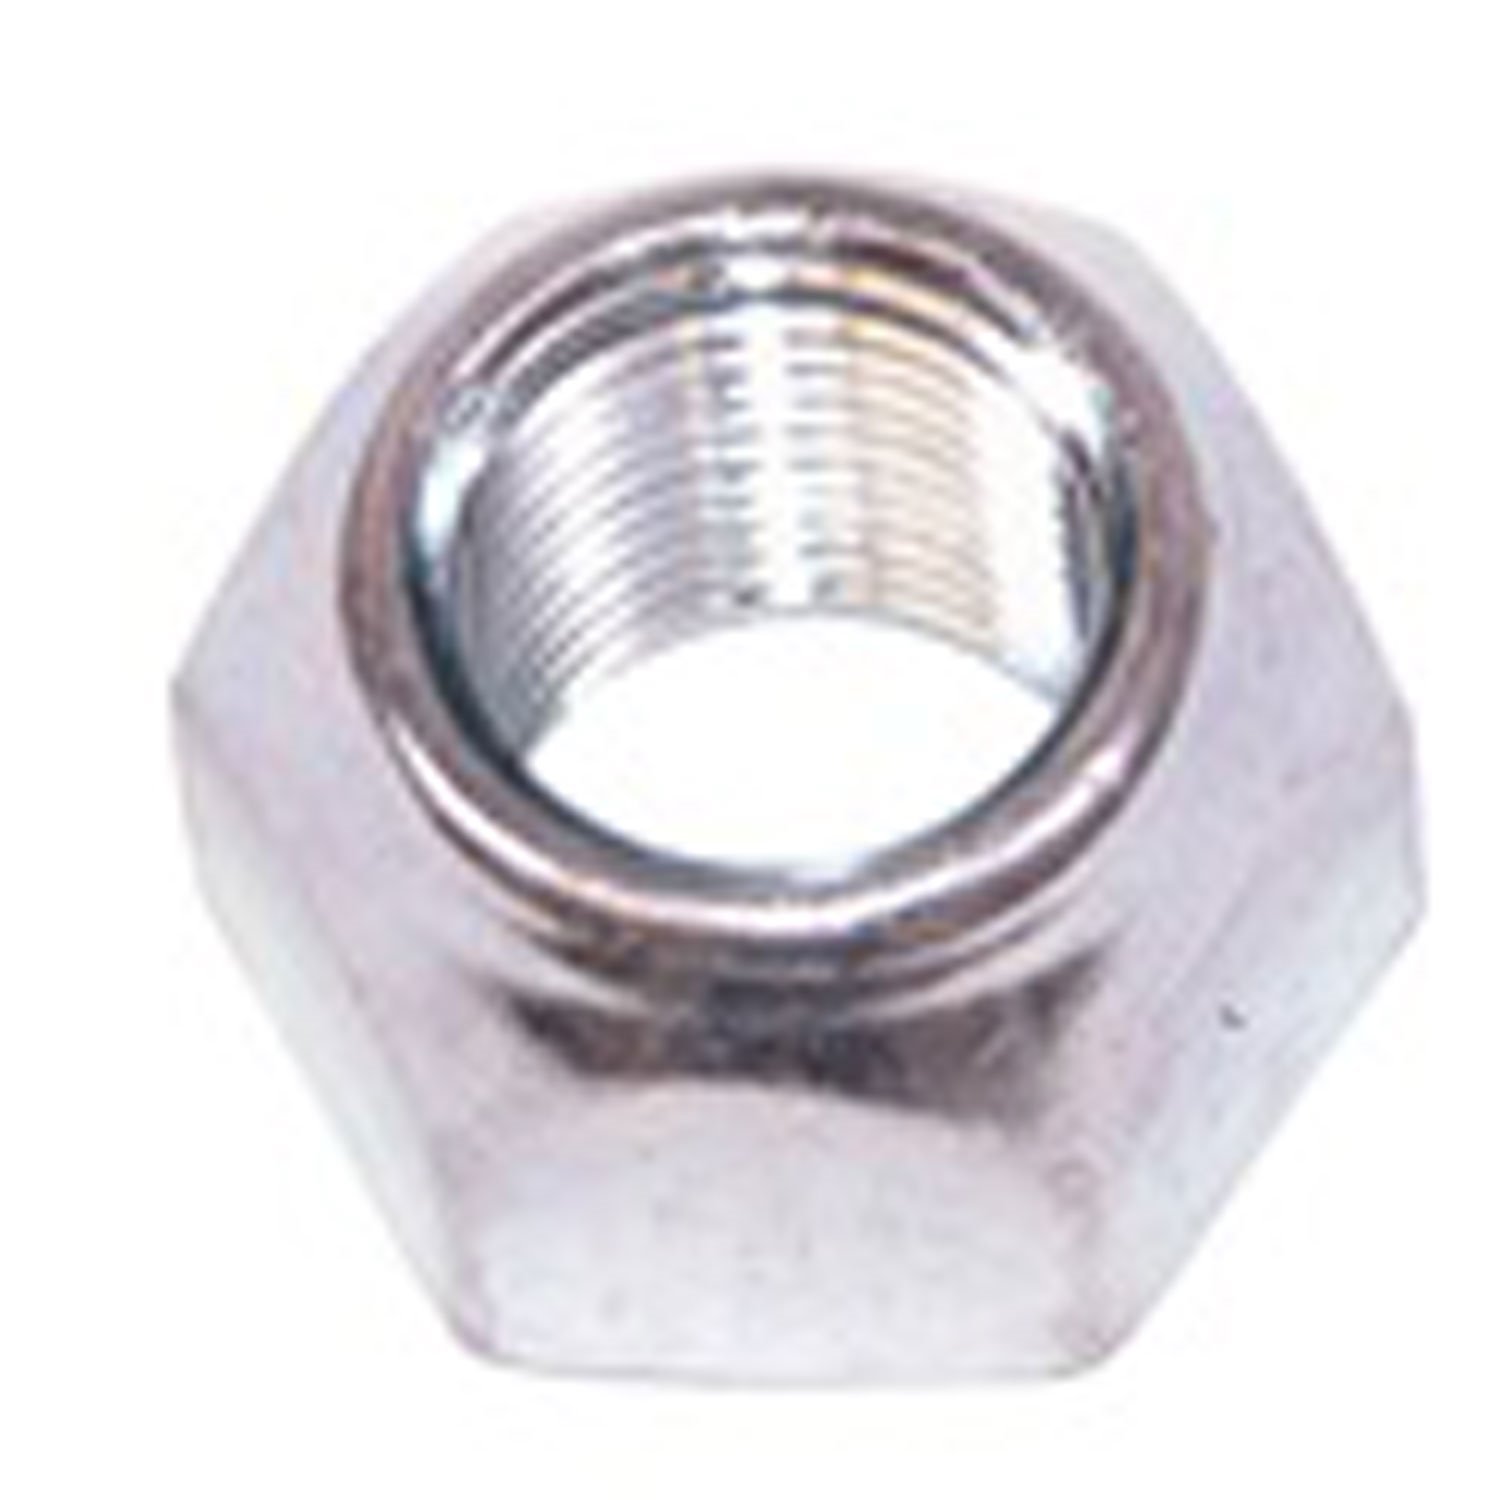 Replacement lug nut from Omix-ADA, Fits front or rear axles and has right hand threads., Fits